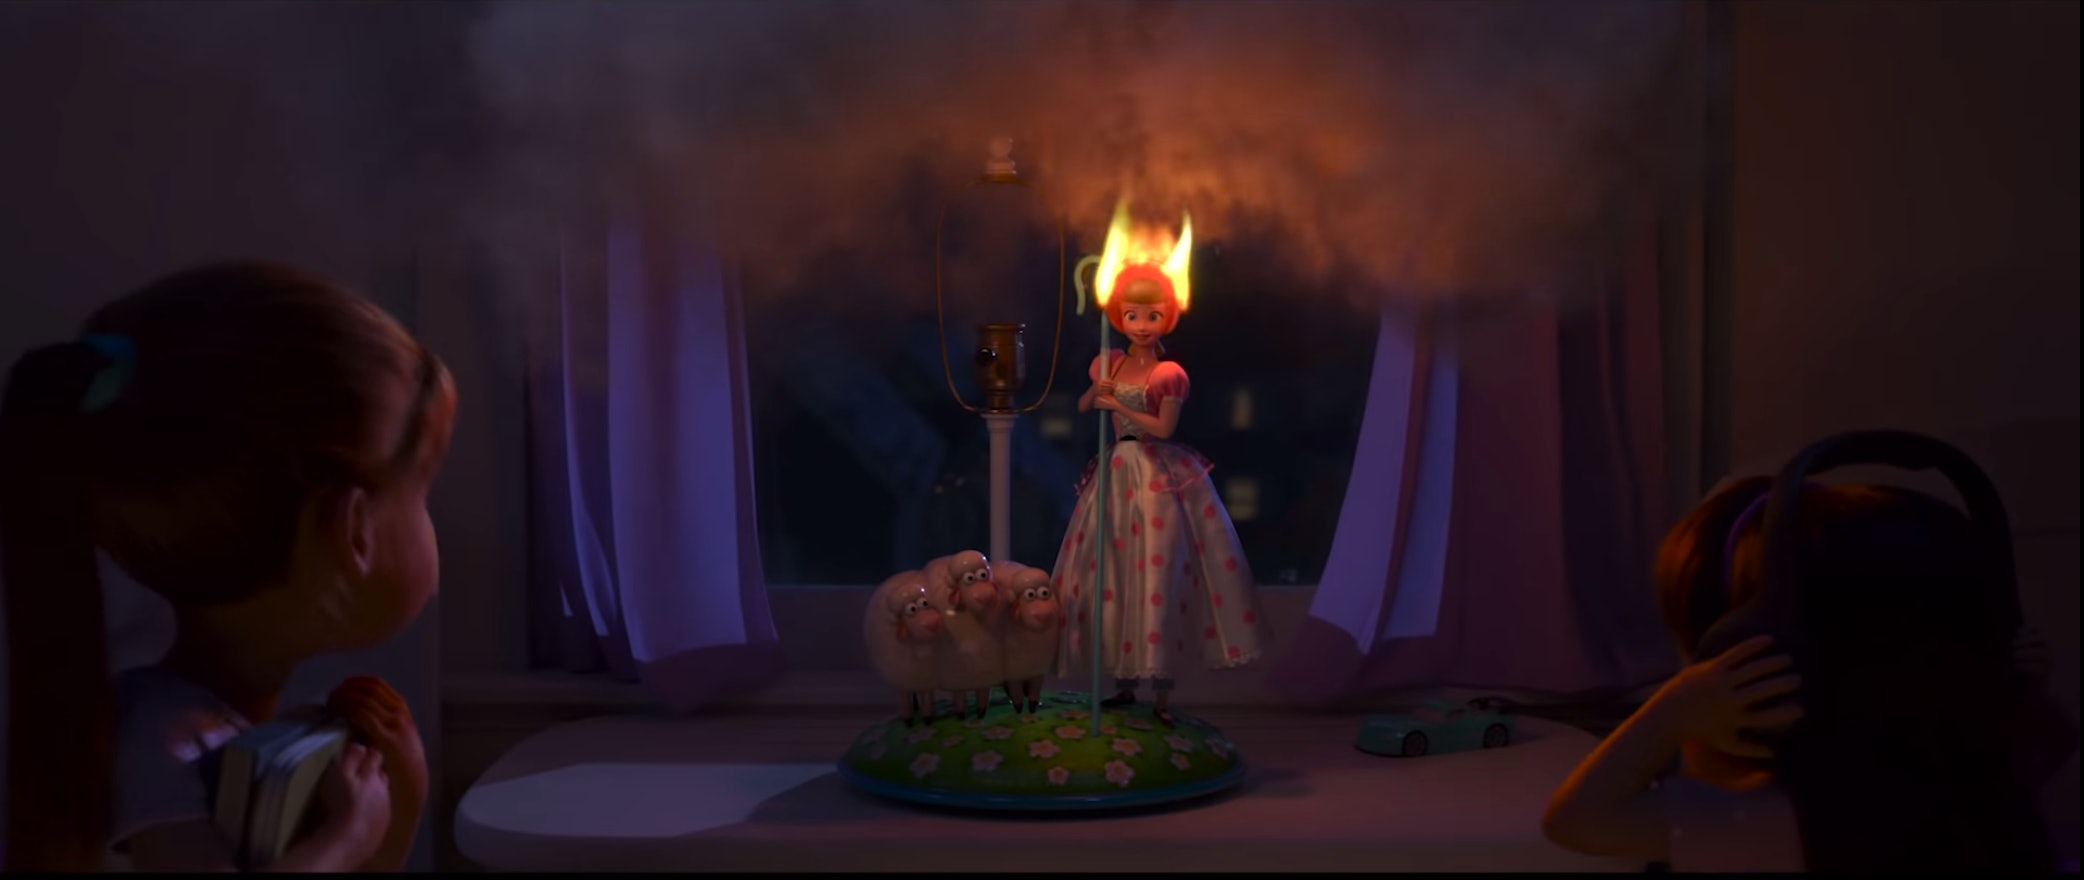 download toy story lamp life